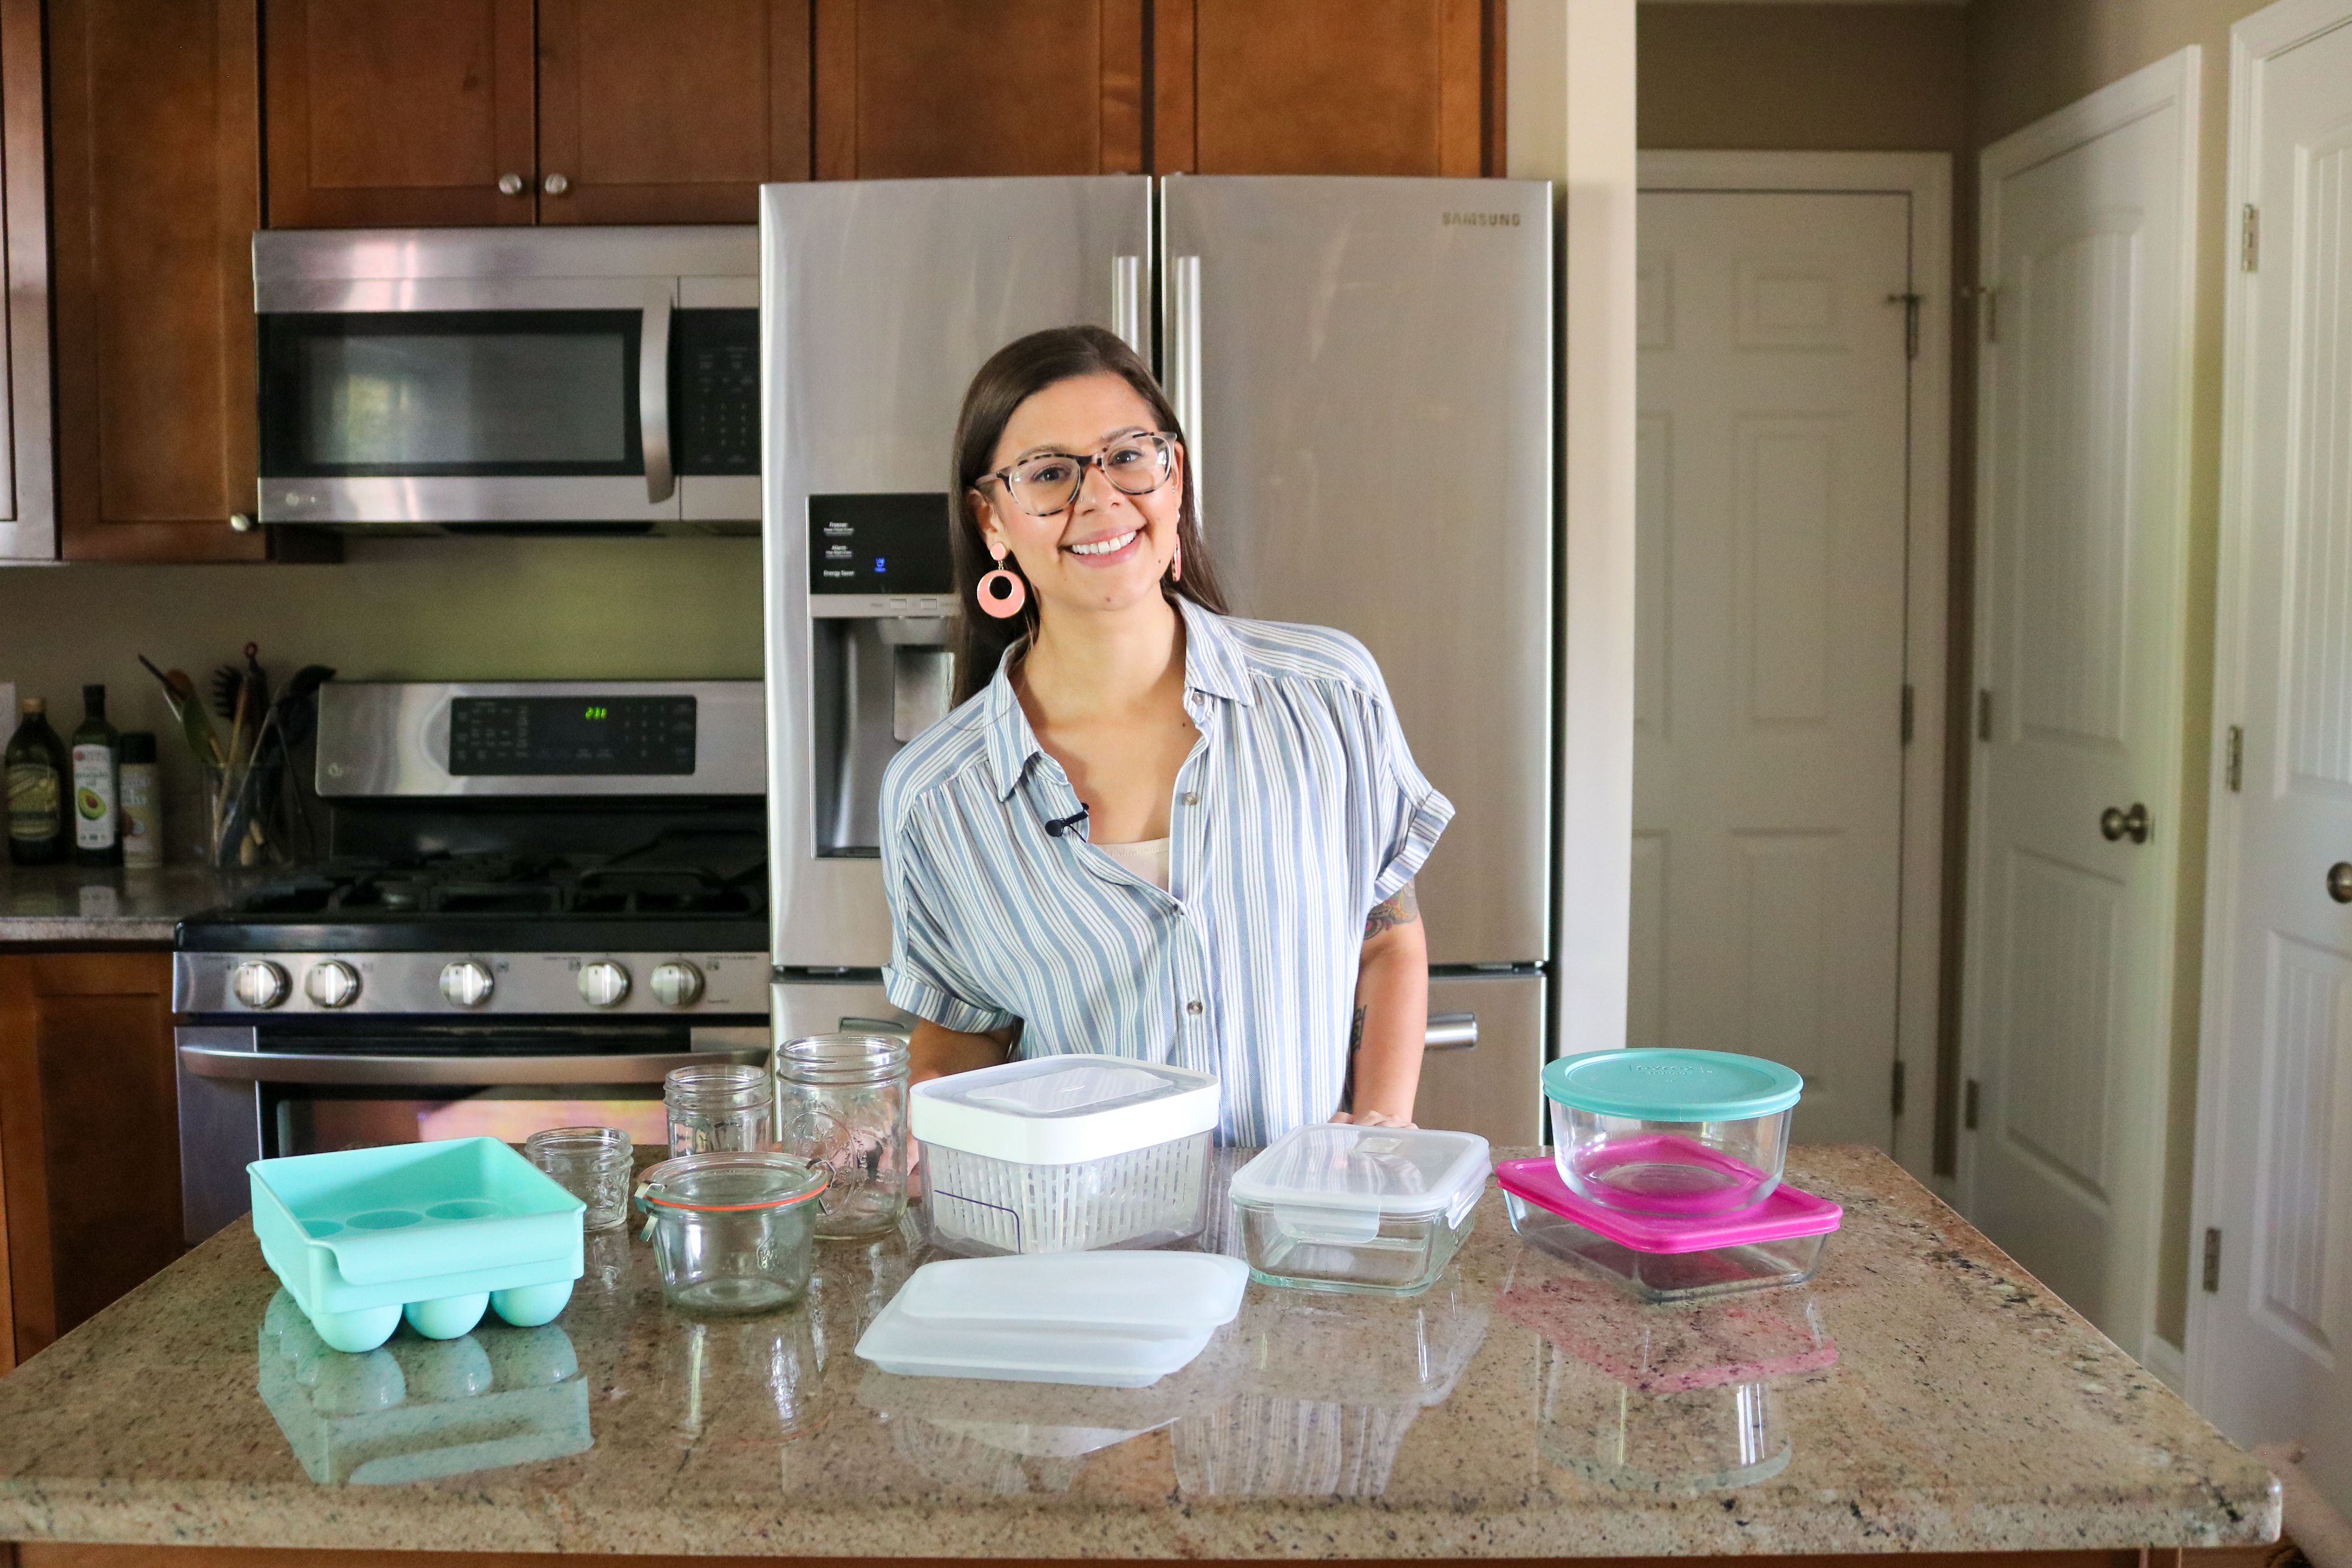 The Best Kitchen Tools for Meal Prep (video) - Healthy Mama Kris